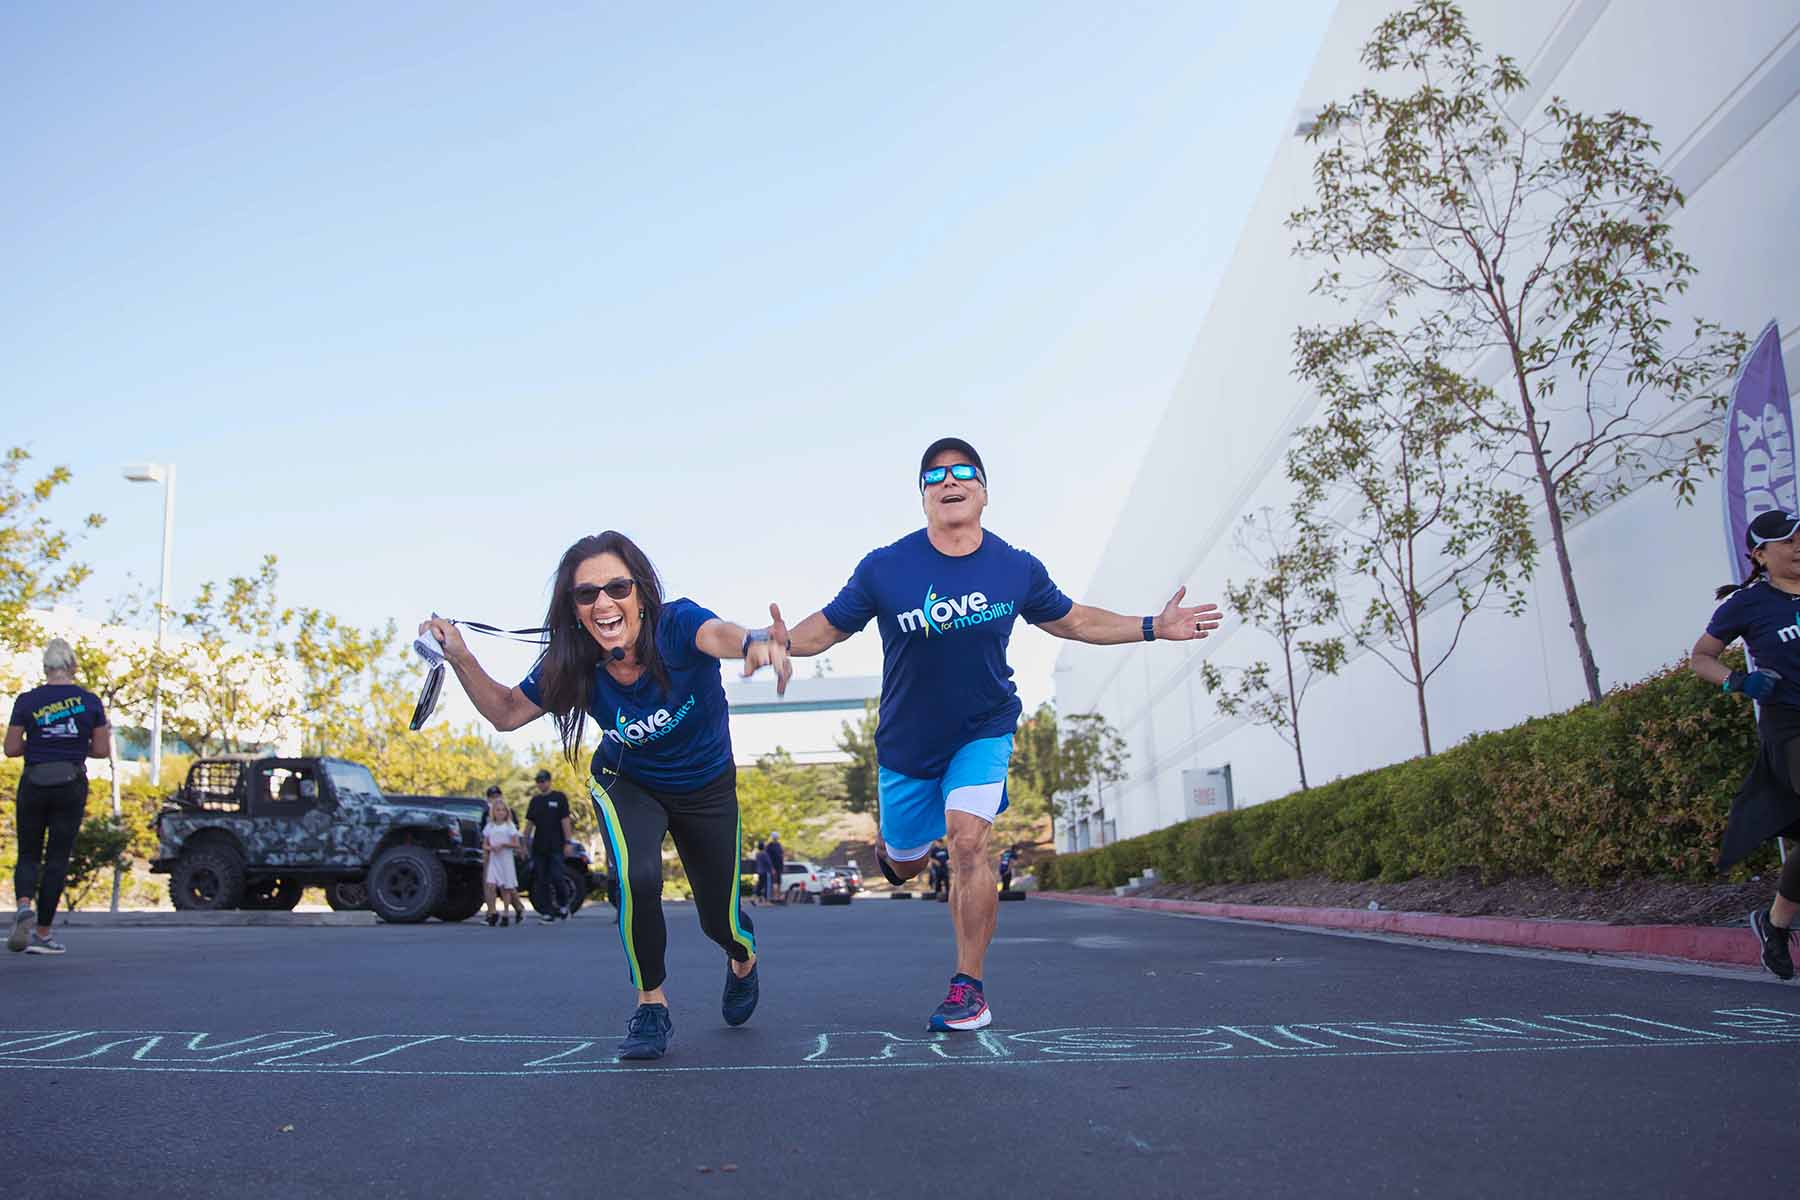 Two people racing to the finish line in Move for mobility branded T shirts